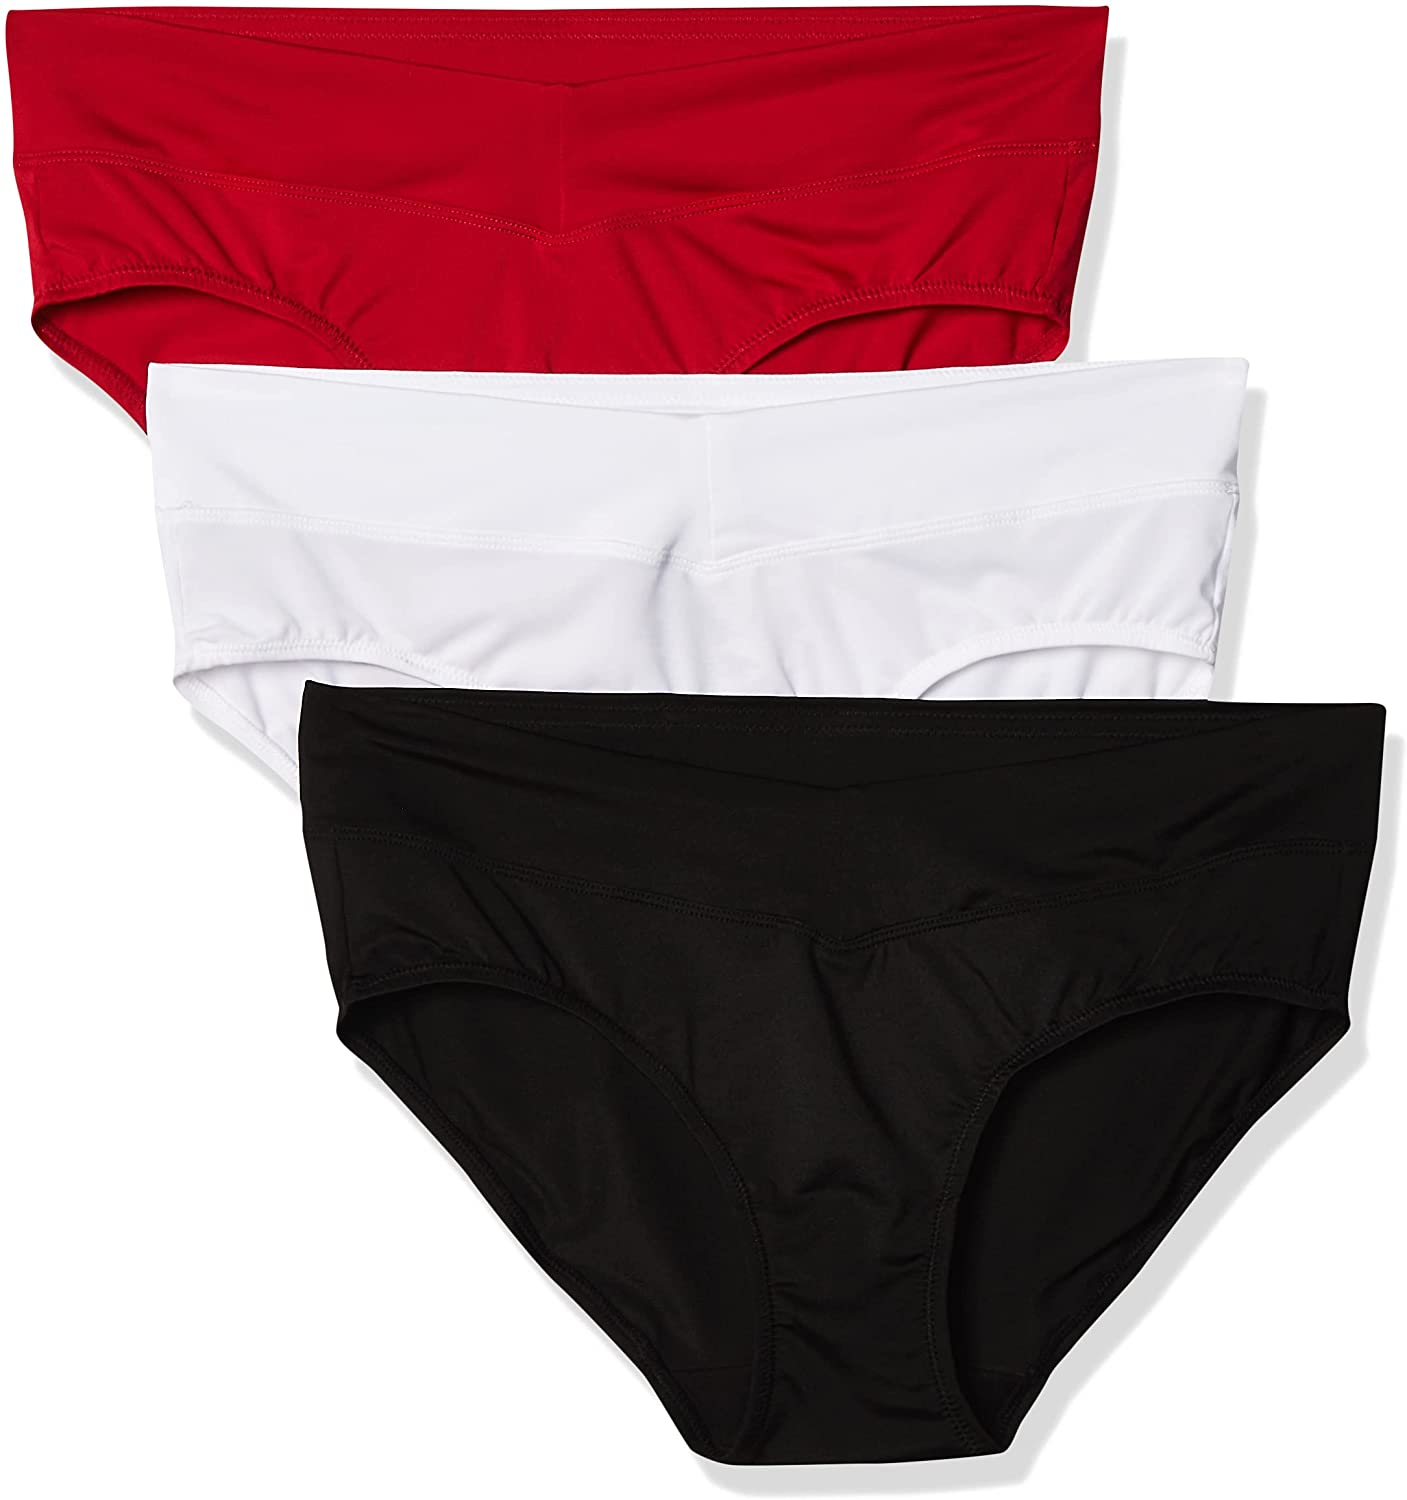 Warner's womens Blissful Benefits No Muffin Top 3 Pack Hipster Panties